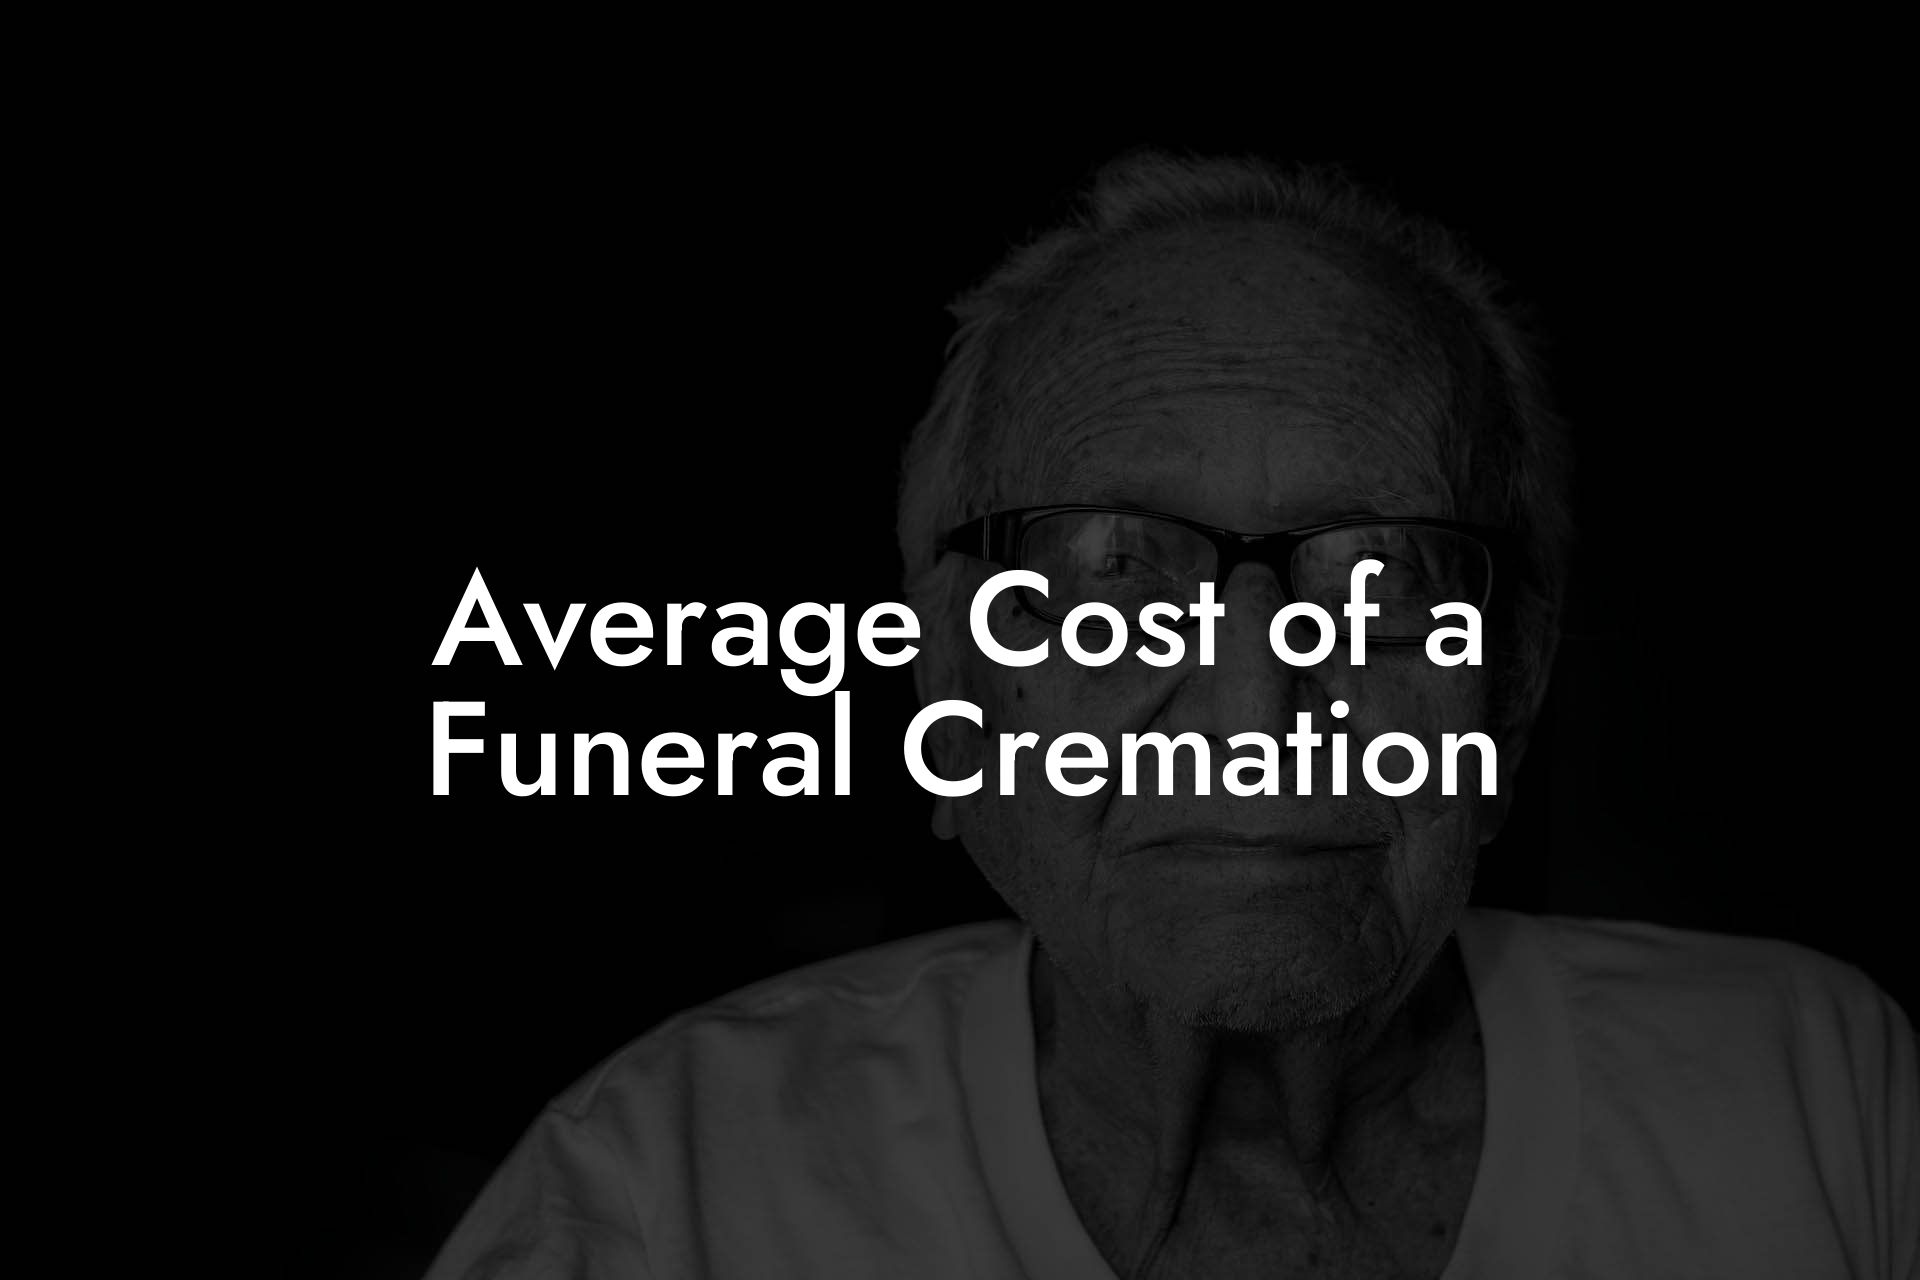 Average Cost of a Funeral Cremation